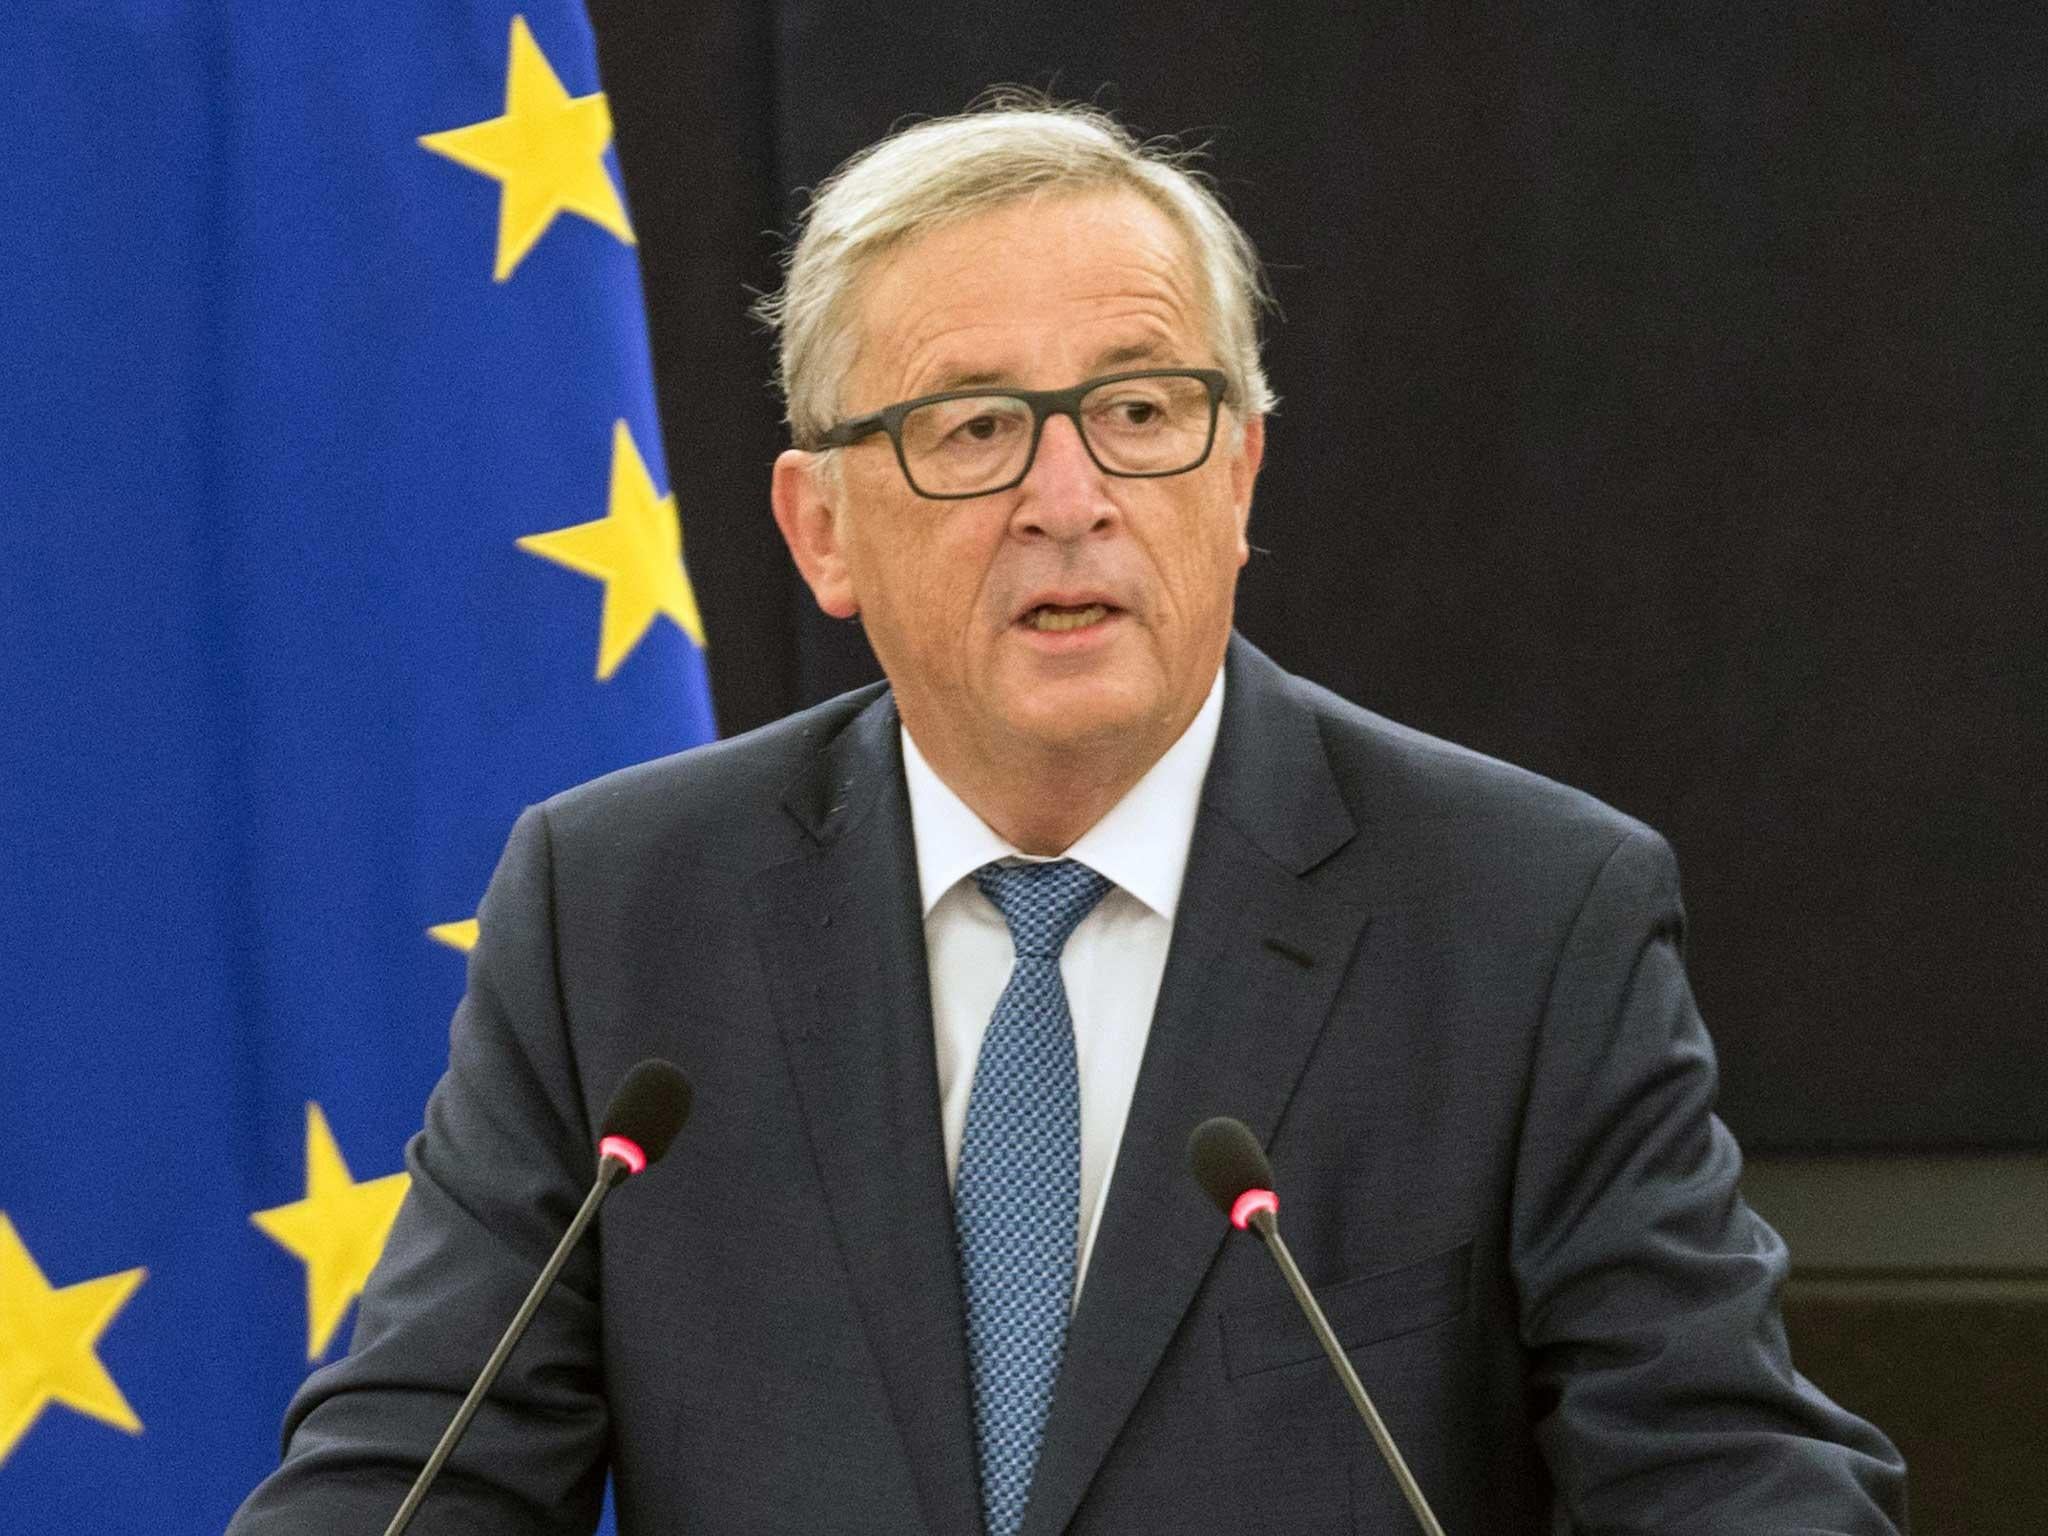 Jean-Claude Juncker 'will not seek re-election' and warns Europe may not be united during Brexit talks - The Independent